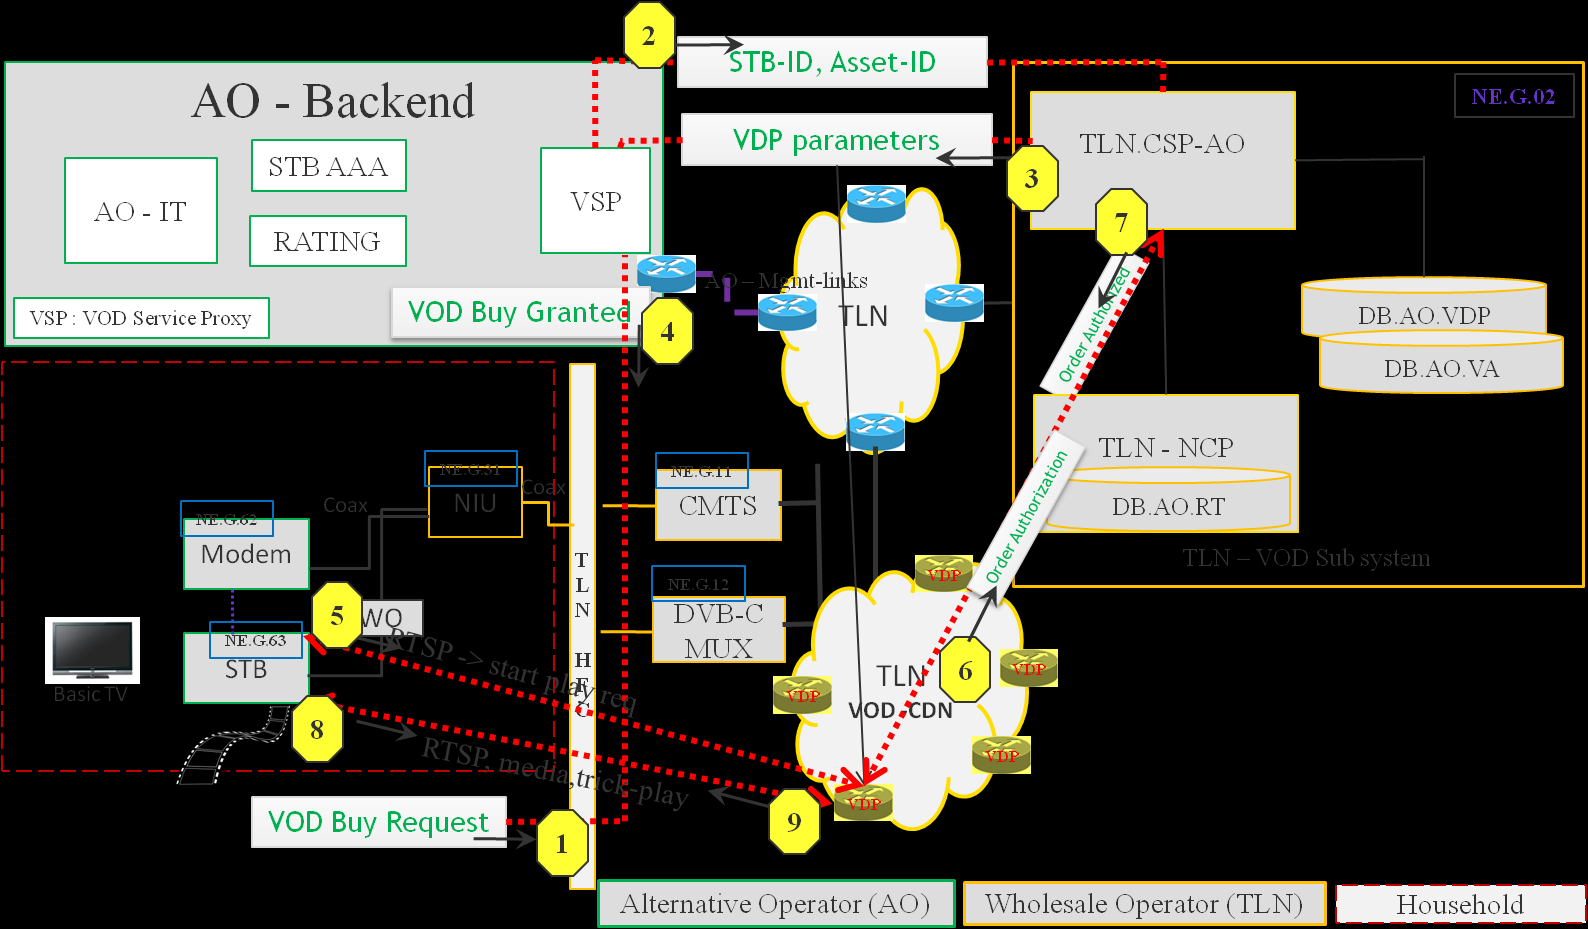 <TLN-WRO-TA-I-A-PIAA> (15) In case the IP Data return path is implemented over the TLN cable network, Telenet will deliver the aggregated return path traffic of AO STB customers towards AO via TLN to